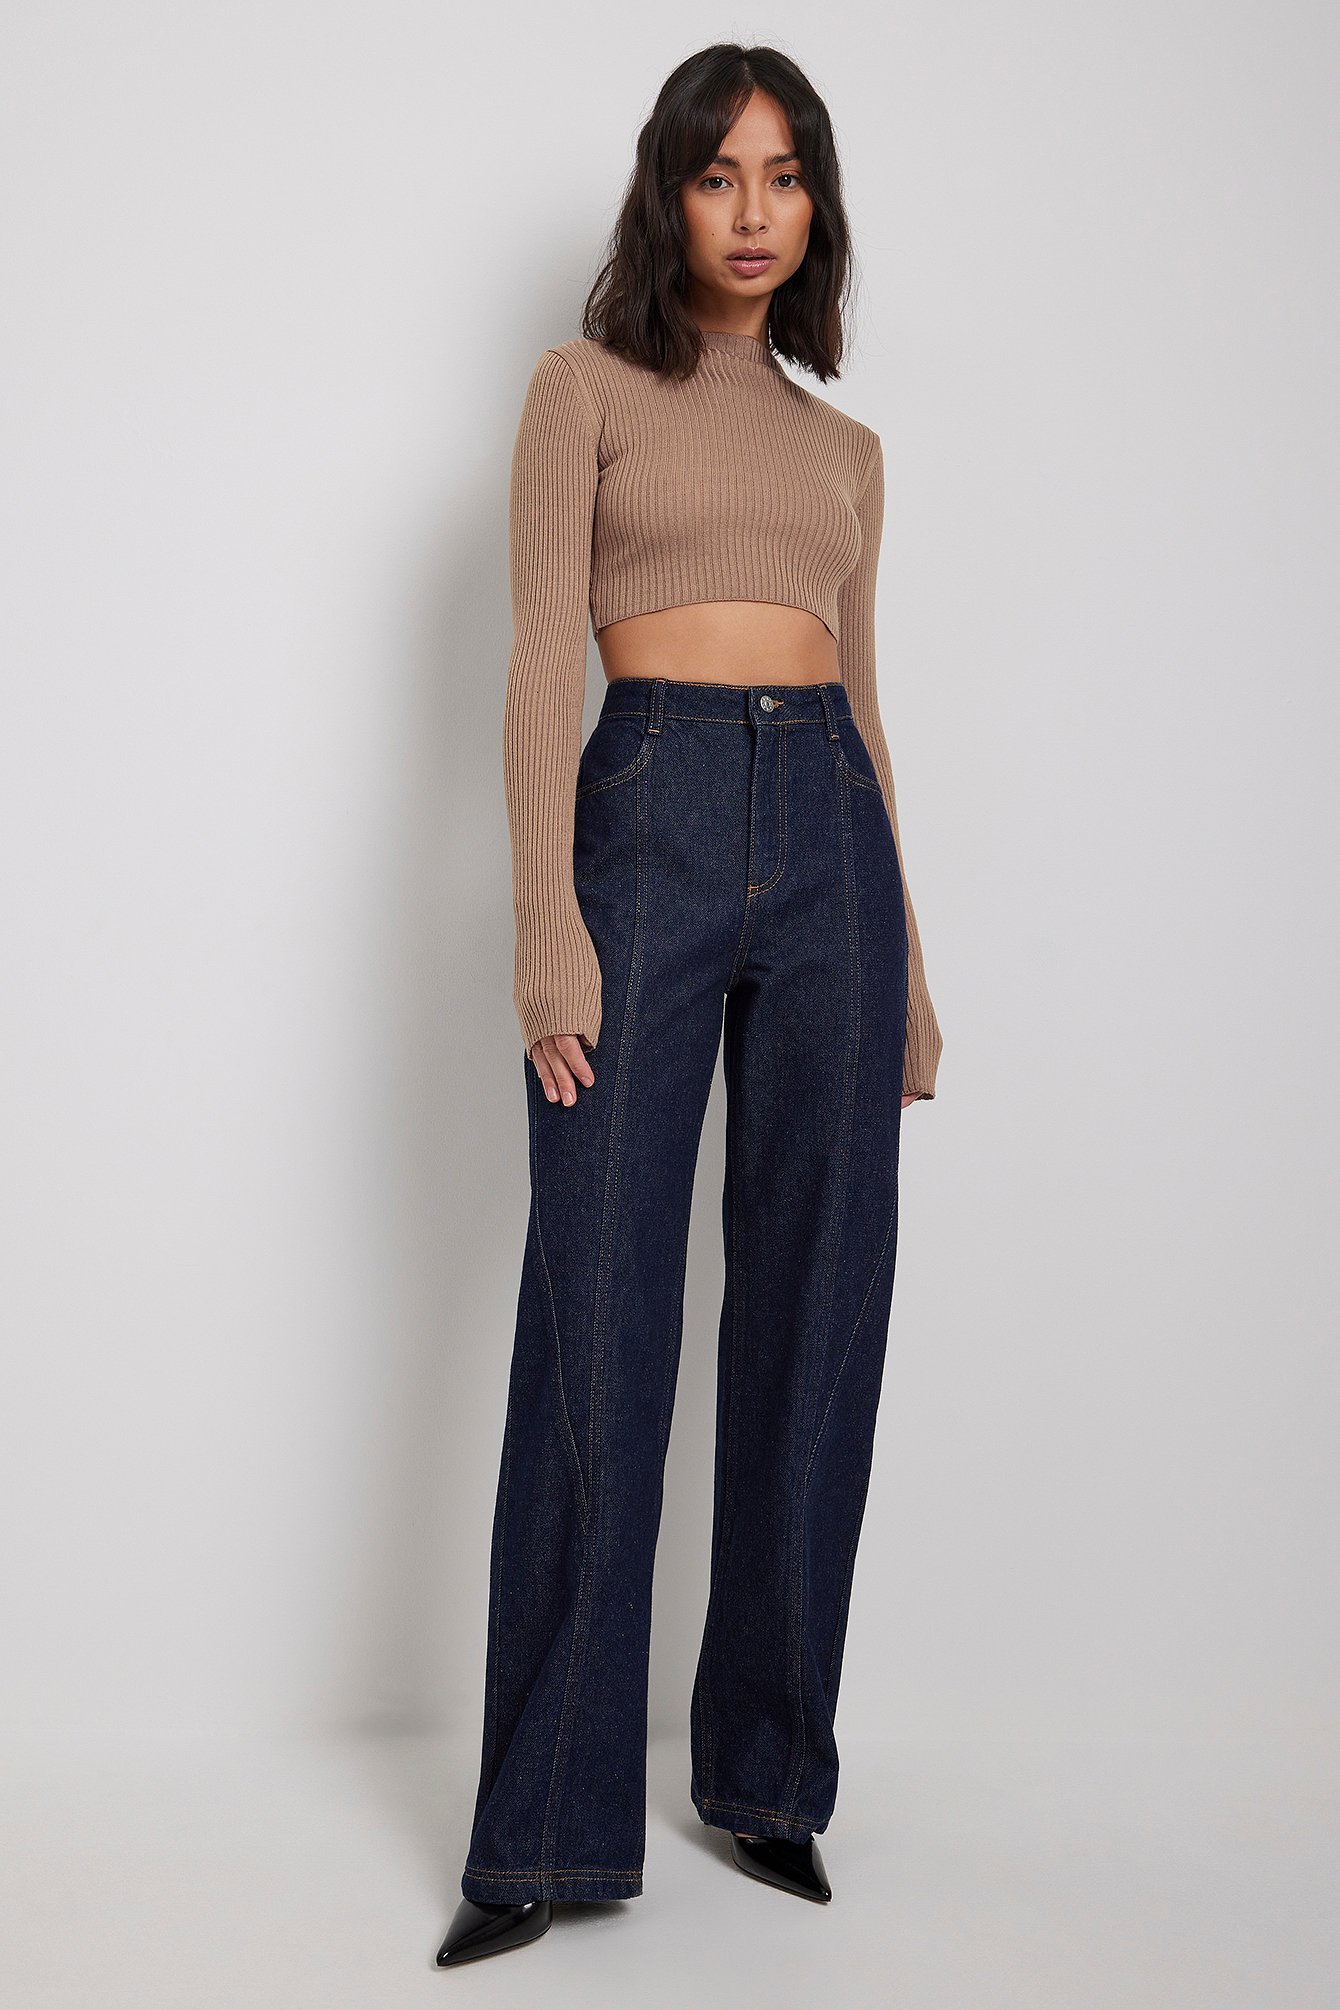 angelica blick x na-kd seam detail straight jeans - blue